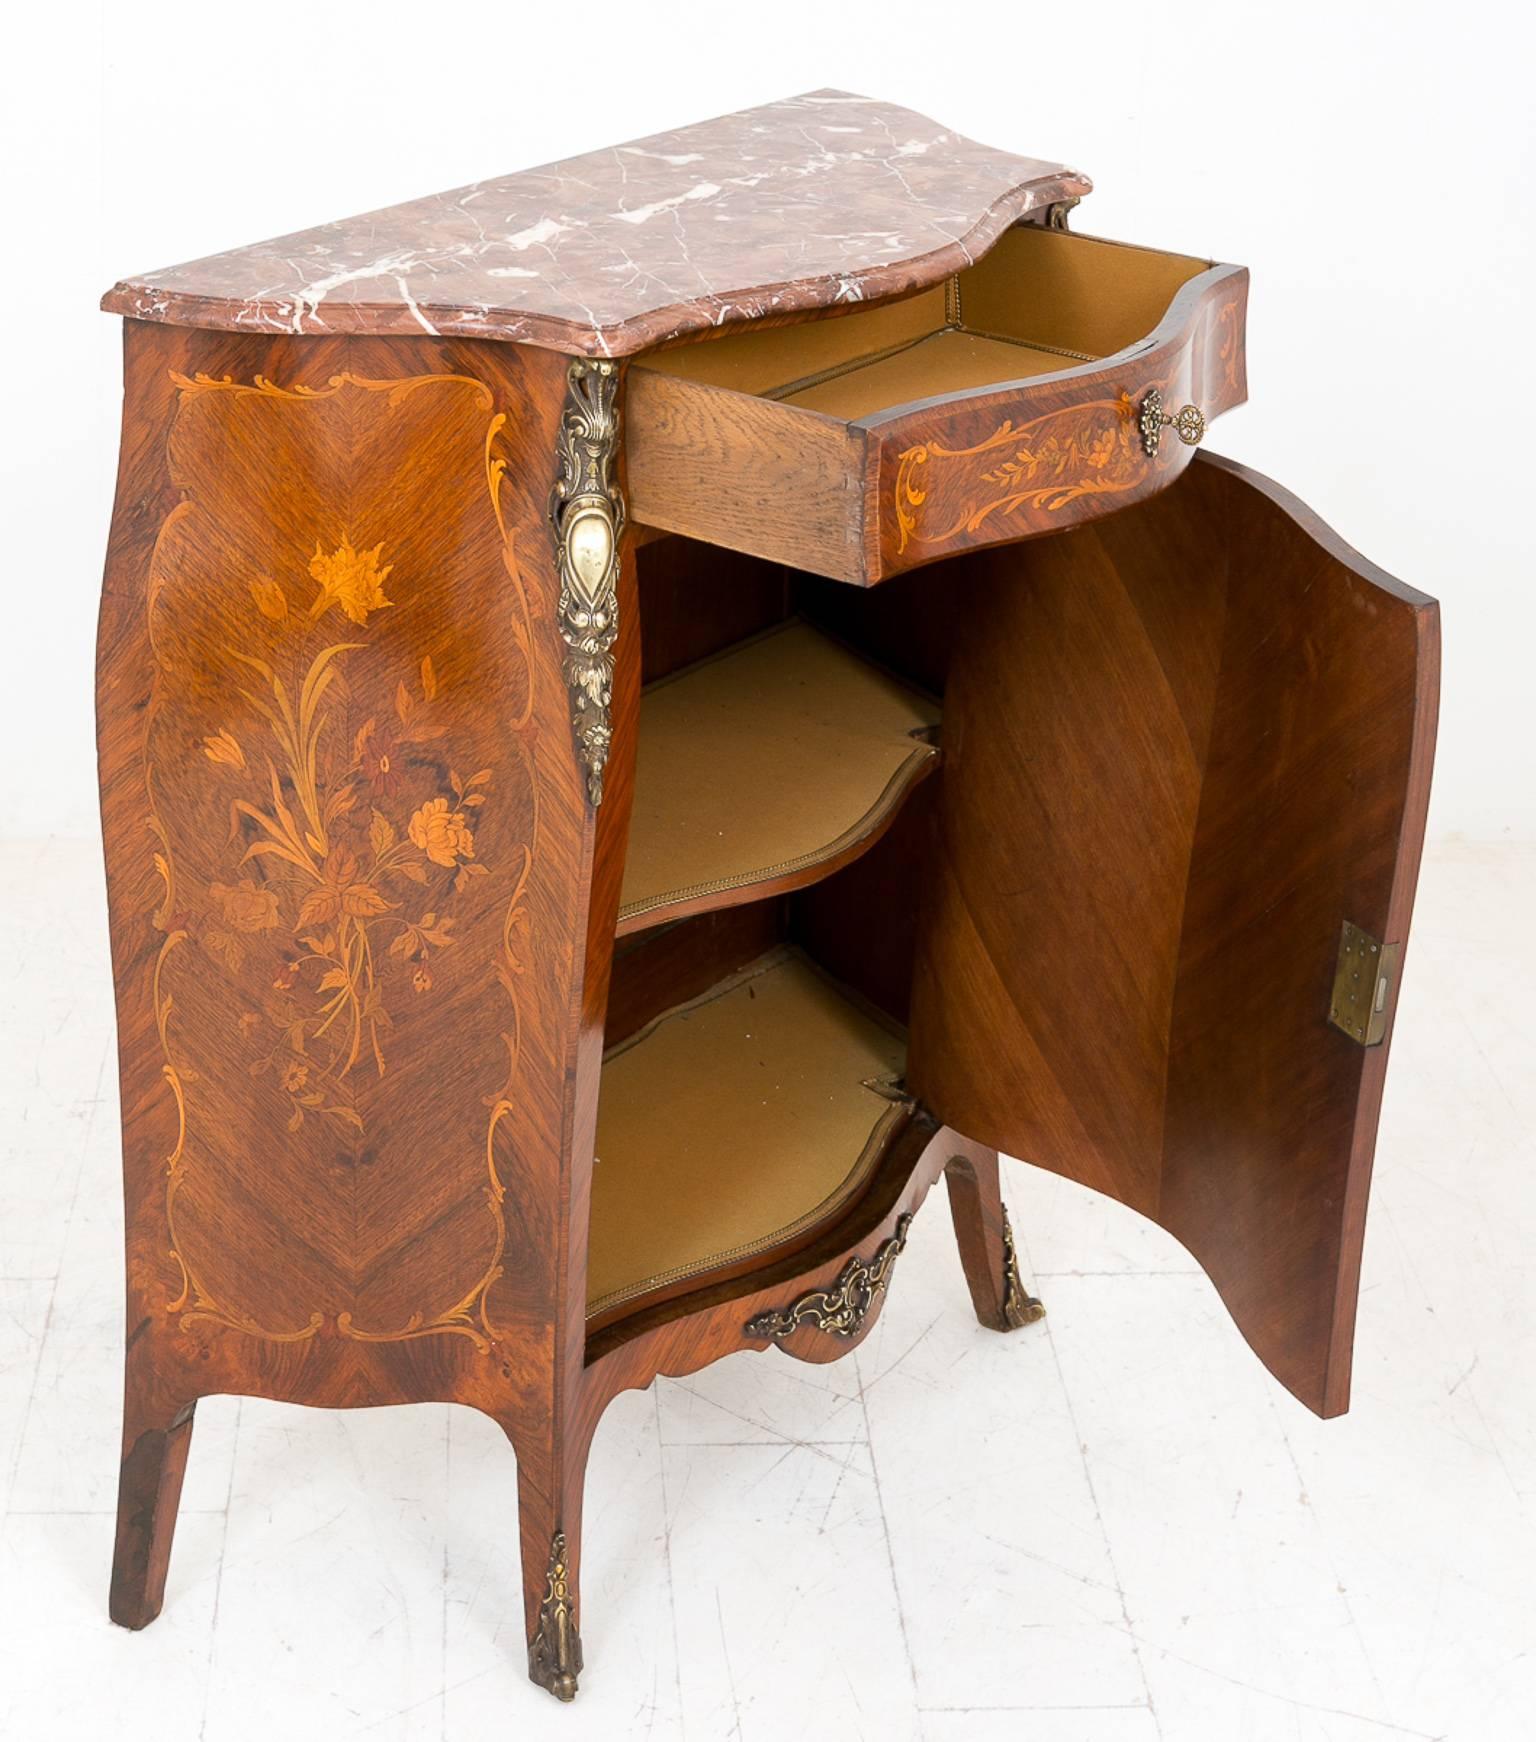 French marquetry side cabinet.
Standing on swept legs with cast brass toes.
The central quartered door with rosewood cross bandings and a central marquetry cartouche.
The bombe shaped sides with a similar format of marquetry and